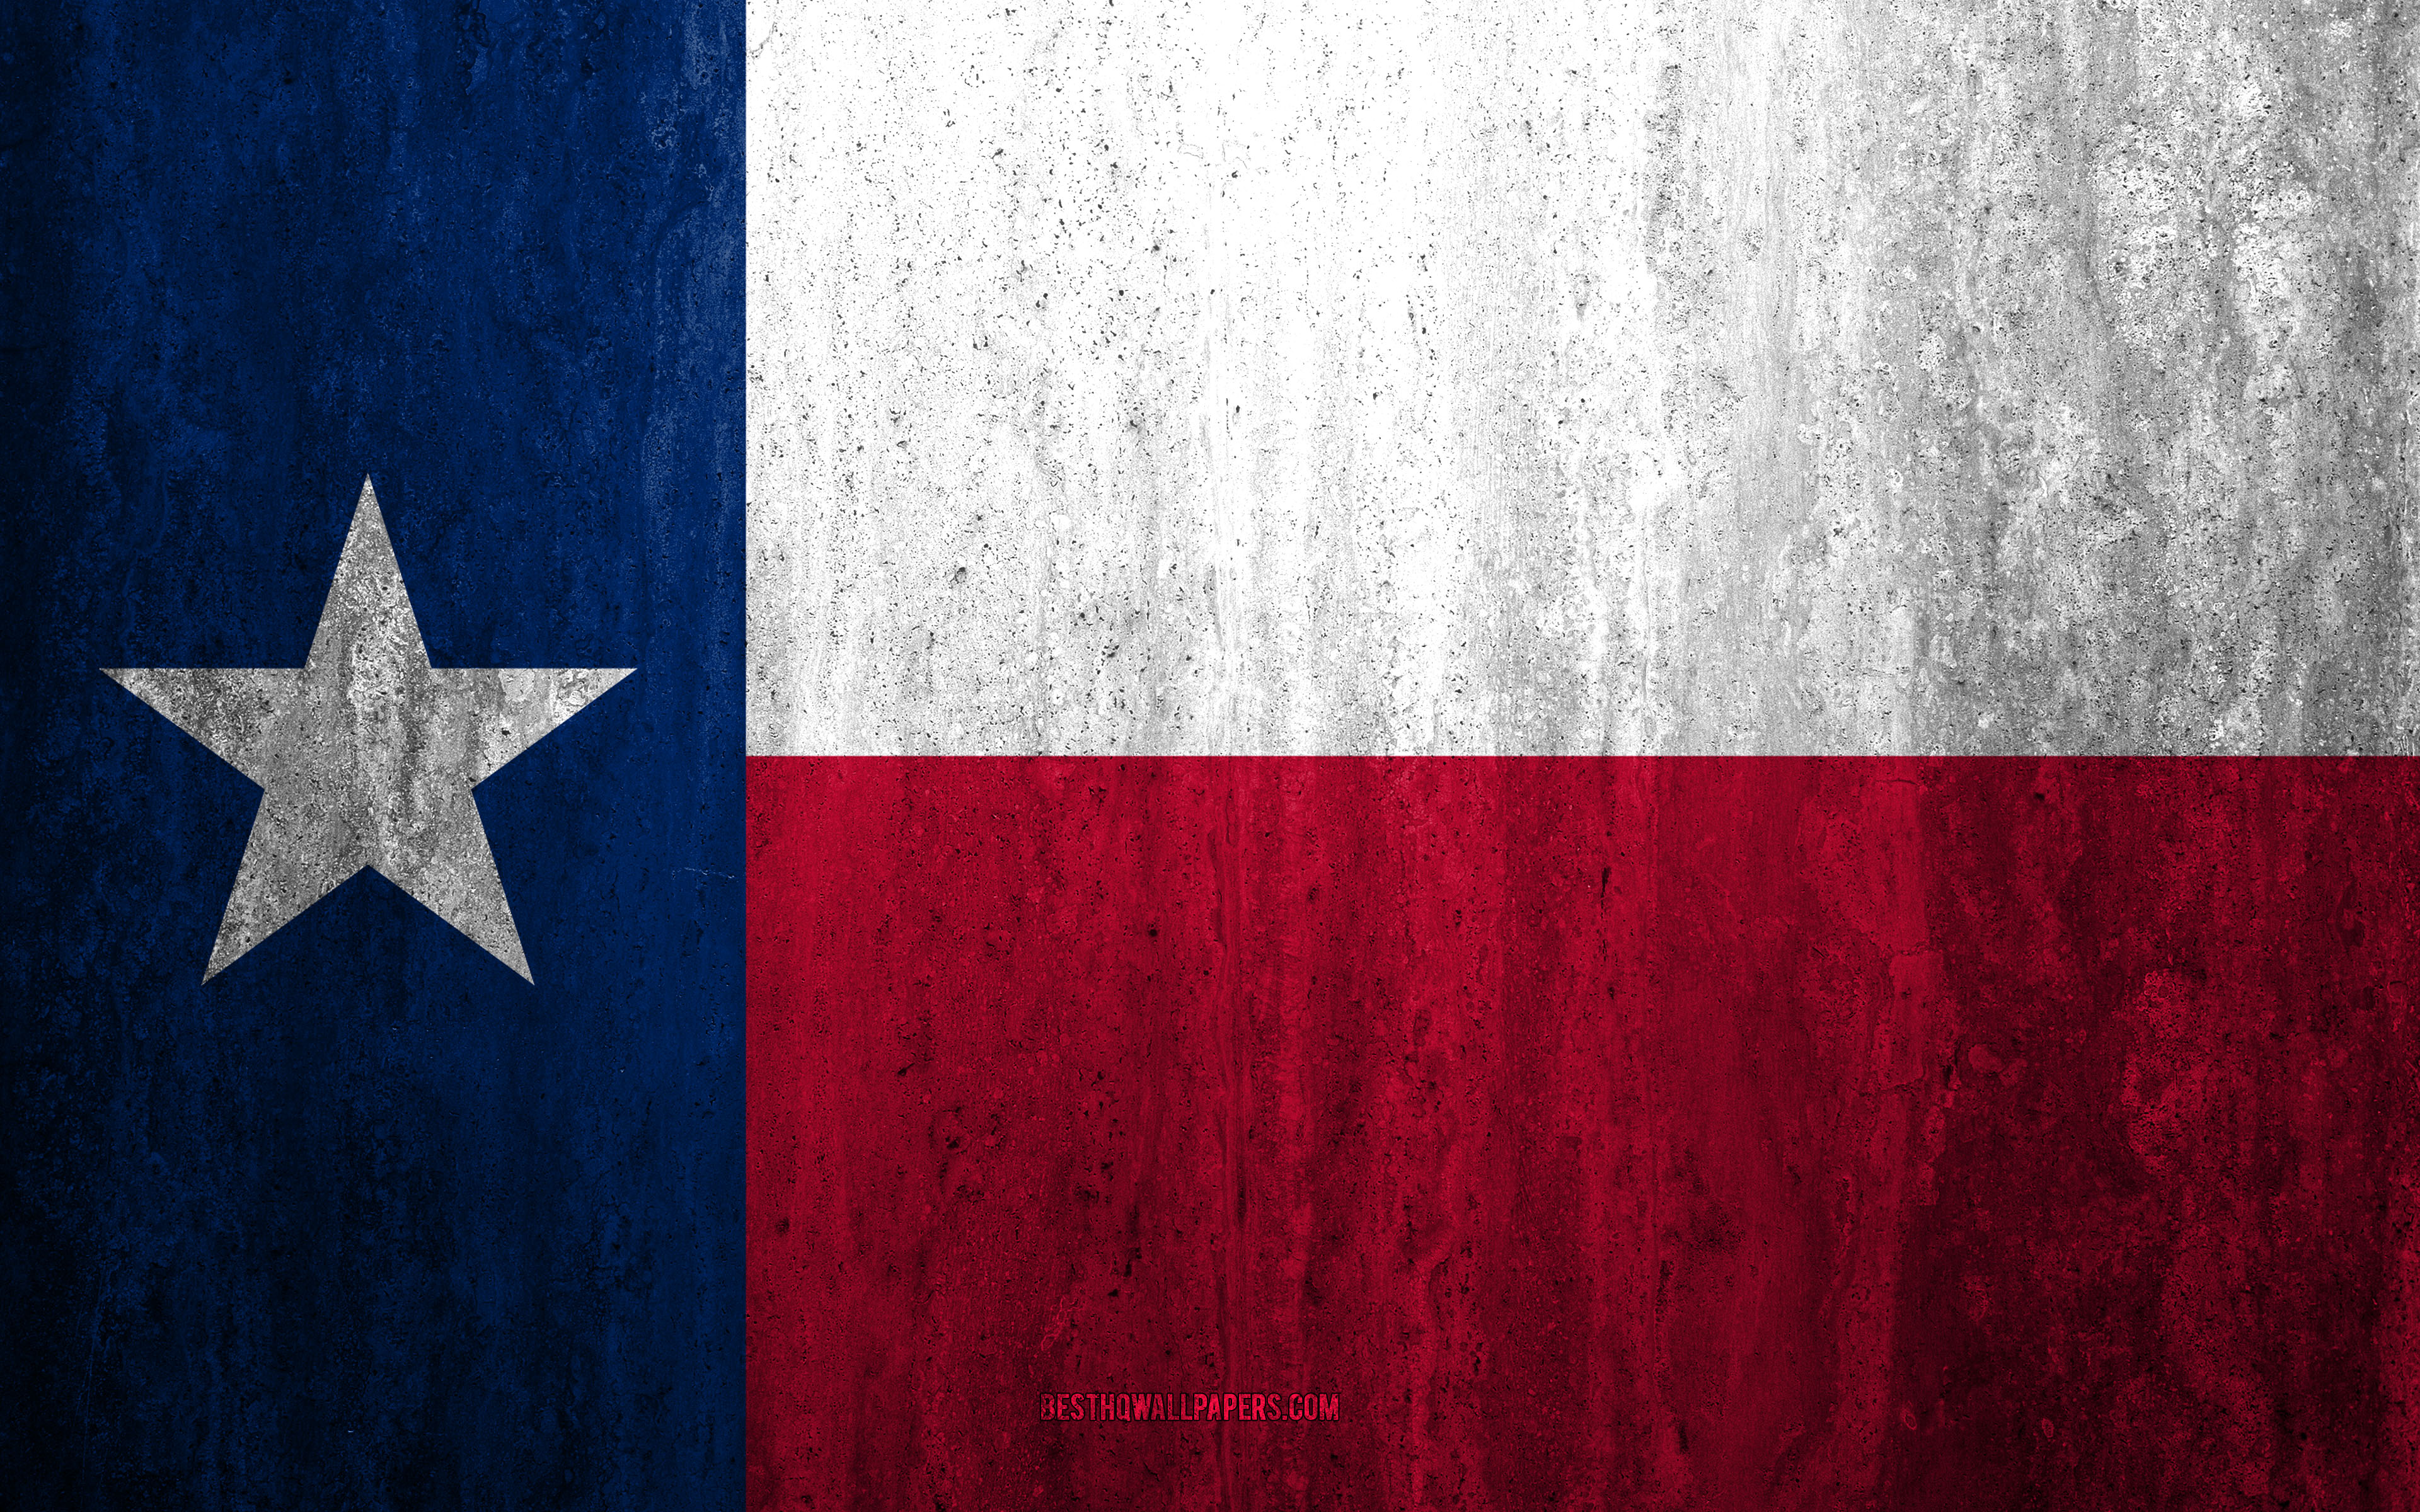 Download wallpaper Flag of Texas, 4k, stone background, American state, grunge flag, Texas flag, USA, grunge art, Texas, flags of US states for desktop with resolution 3840x2400. High Quality HD picture wallpaper